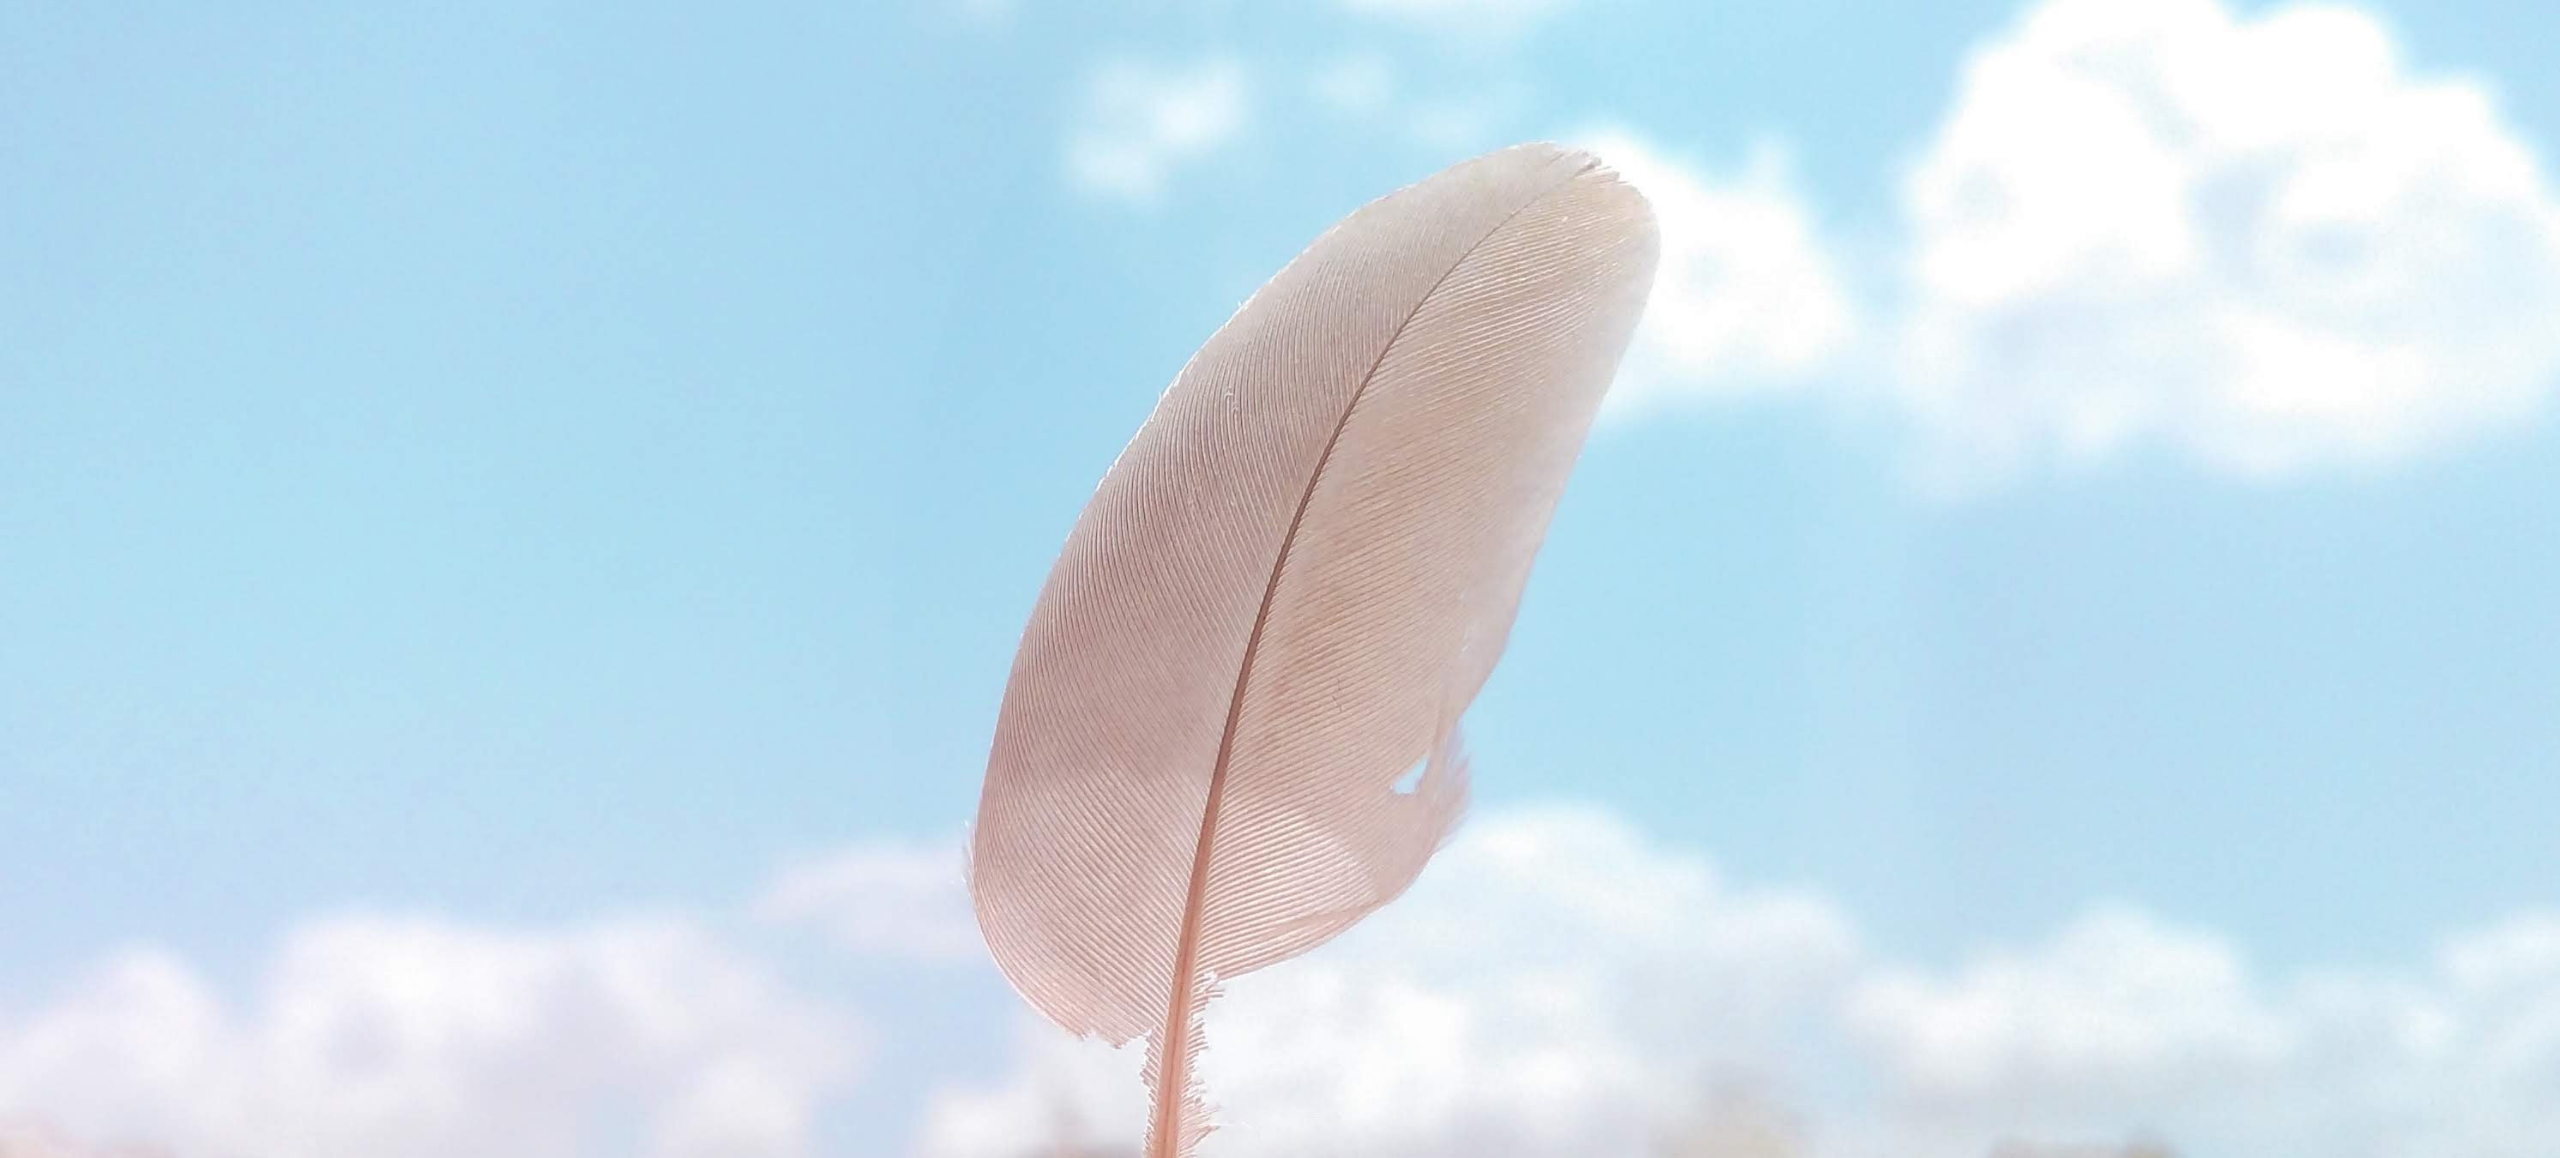 photo of a bird feather against a bright sky with clouds